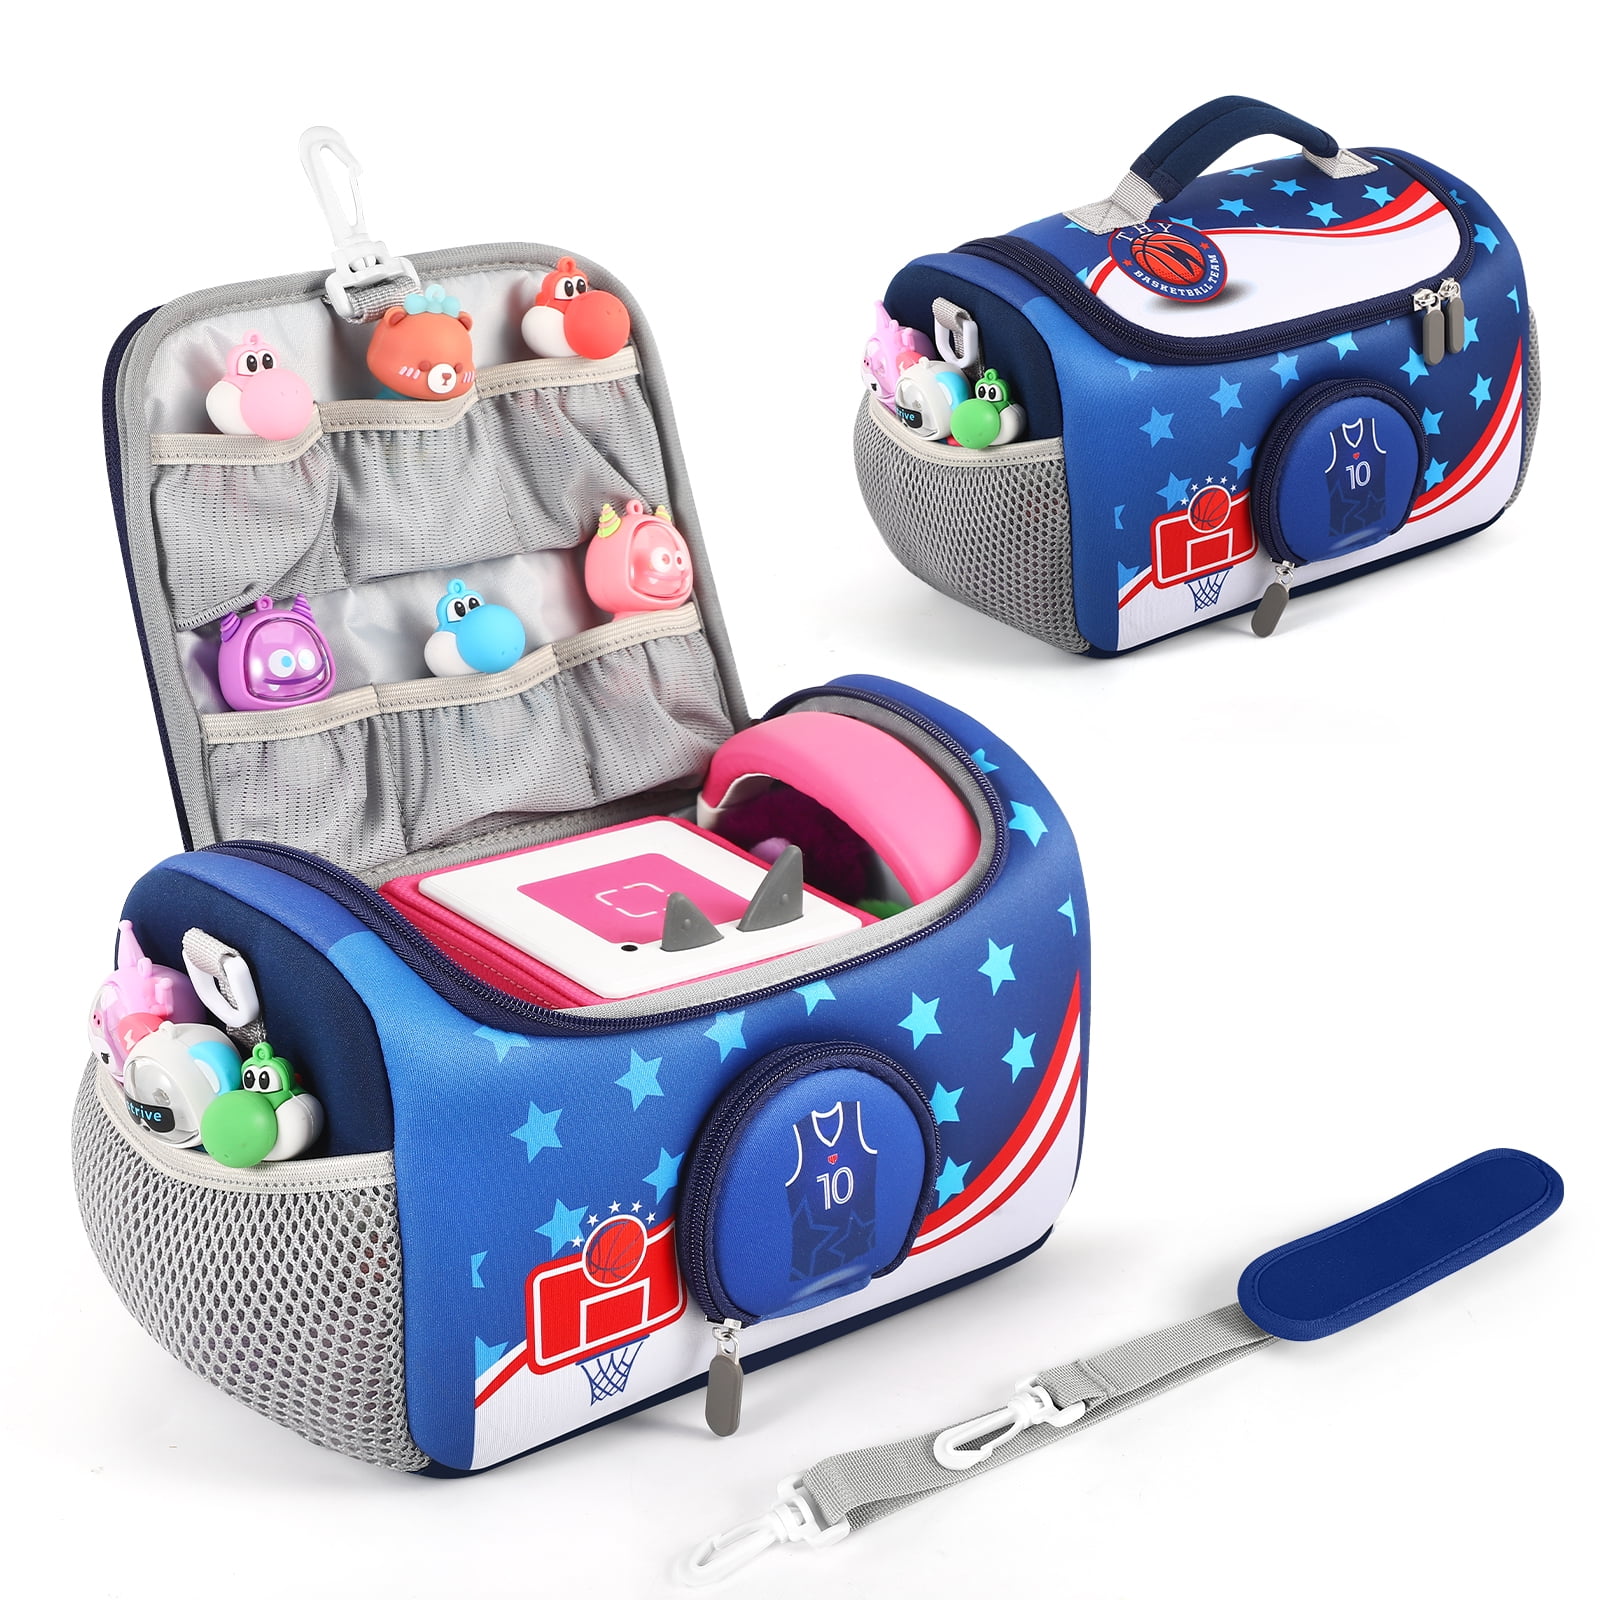 Carrying Case for Toniebox Starter Set Storage Carrier Bag for Toniesbox  Audio Player Carrying Box for Kids Toniebox Accessories Travel Carrying Bag